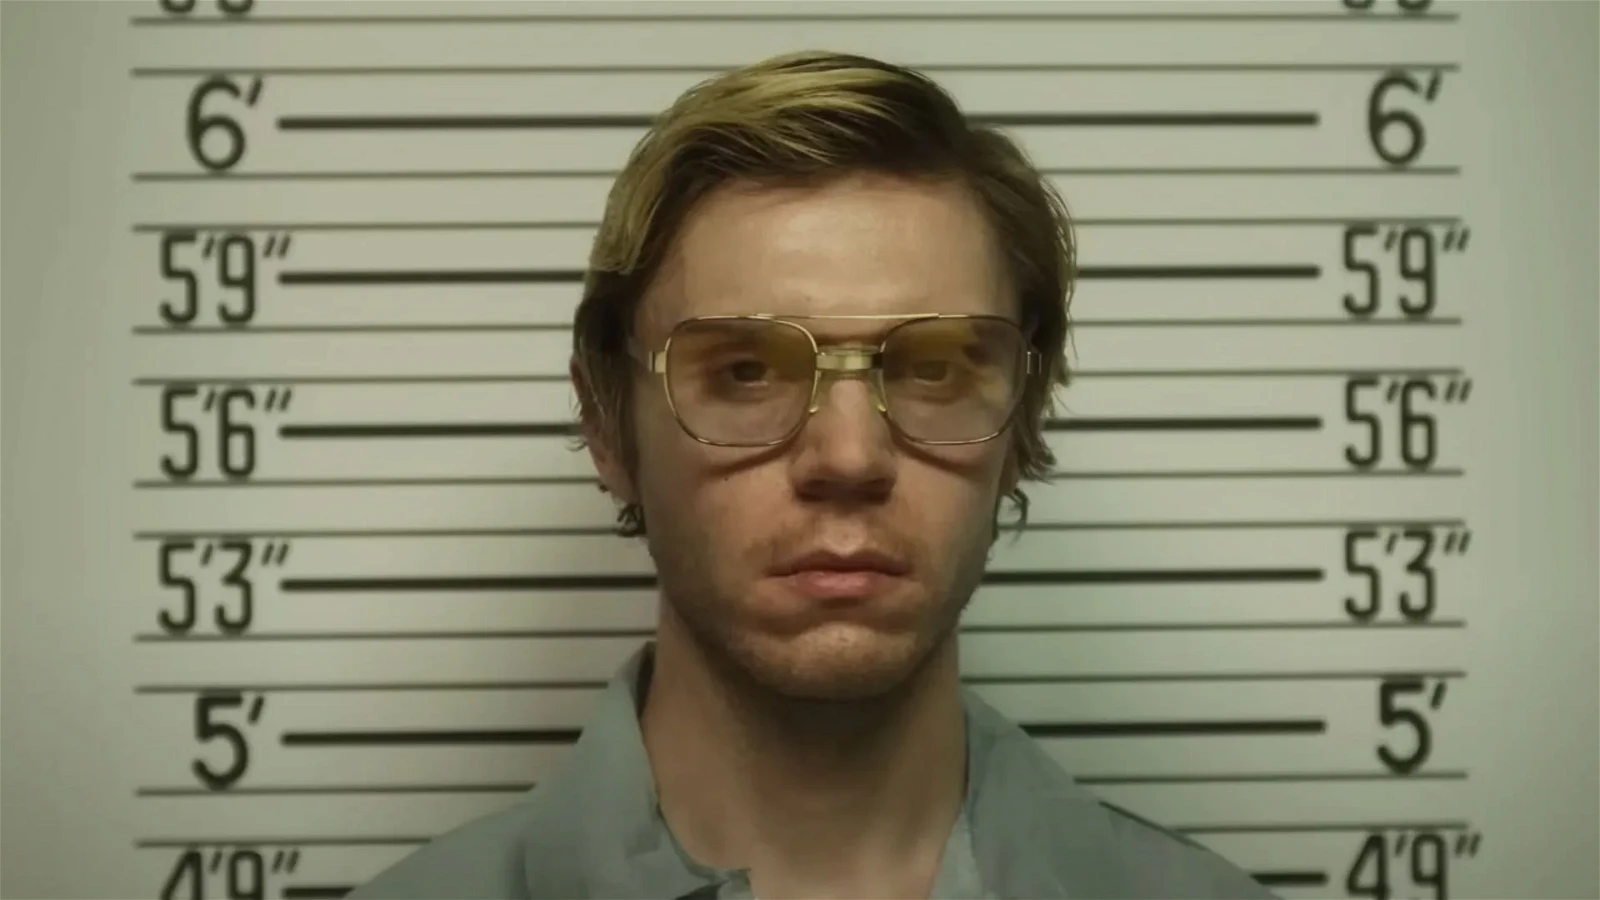 Monster The Jeffery Dahmer Story is another serial killer story